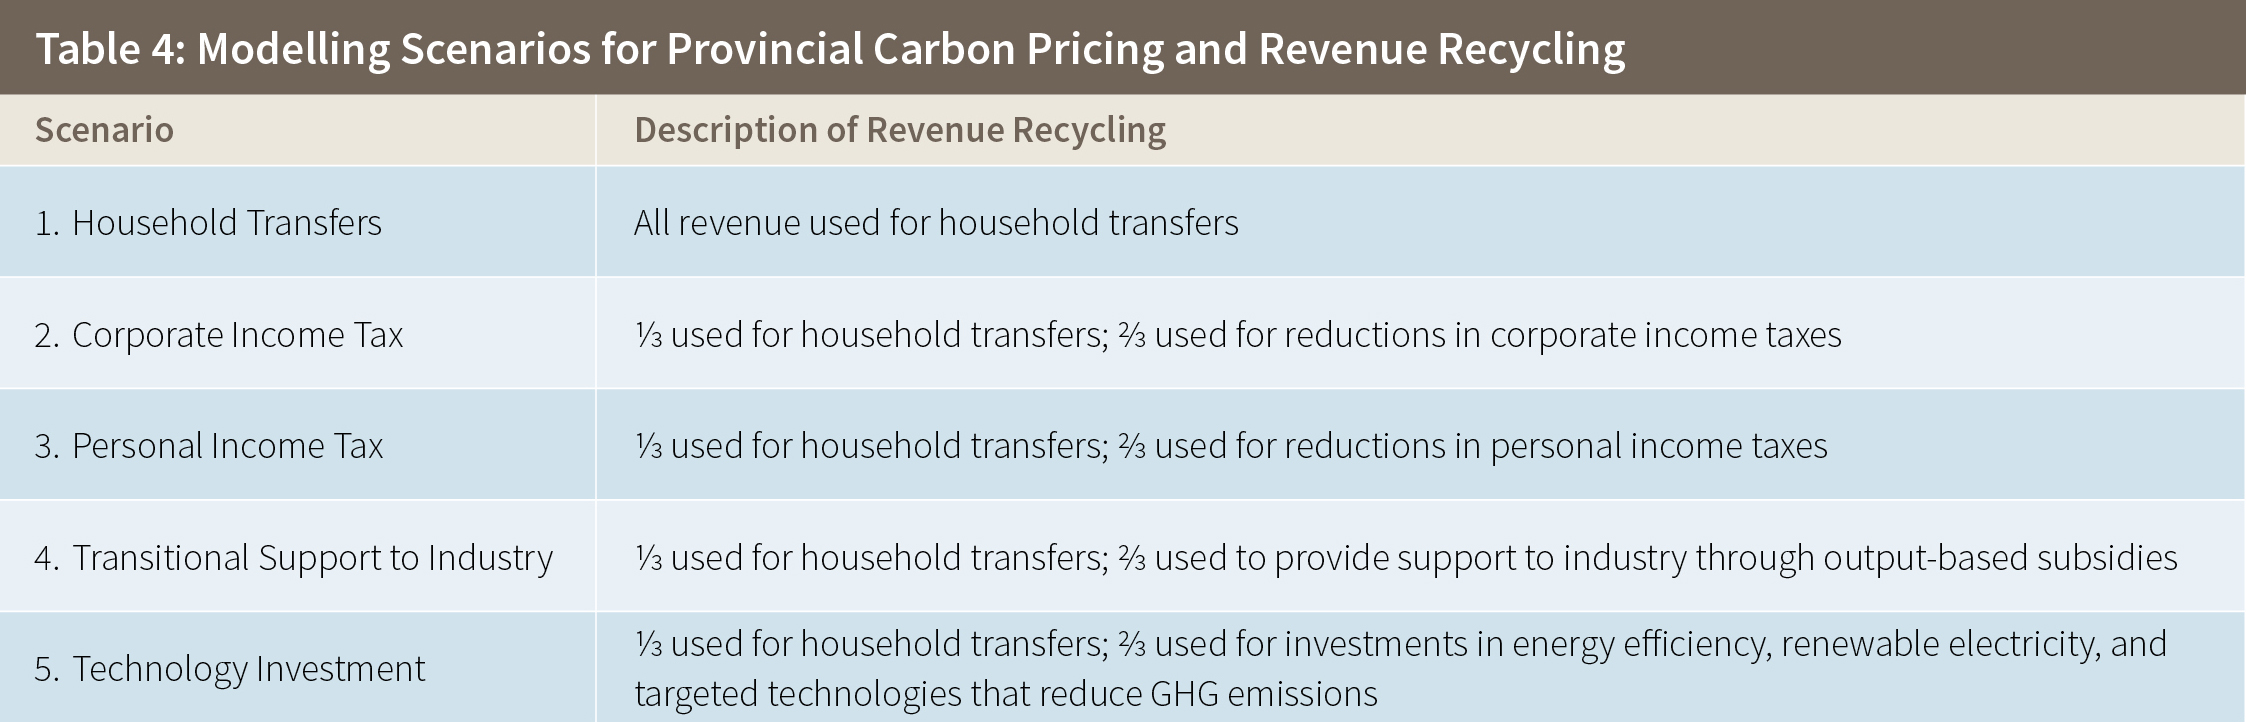 Table 4: Modelling Scenarios for Provincial Carbon Pricing and Revenue Recycling